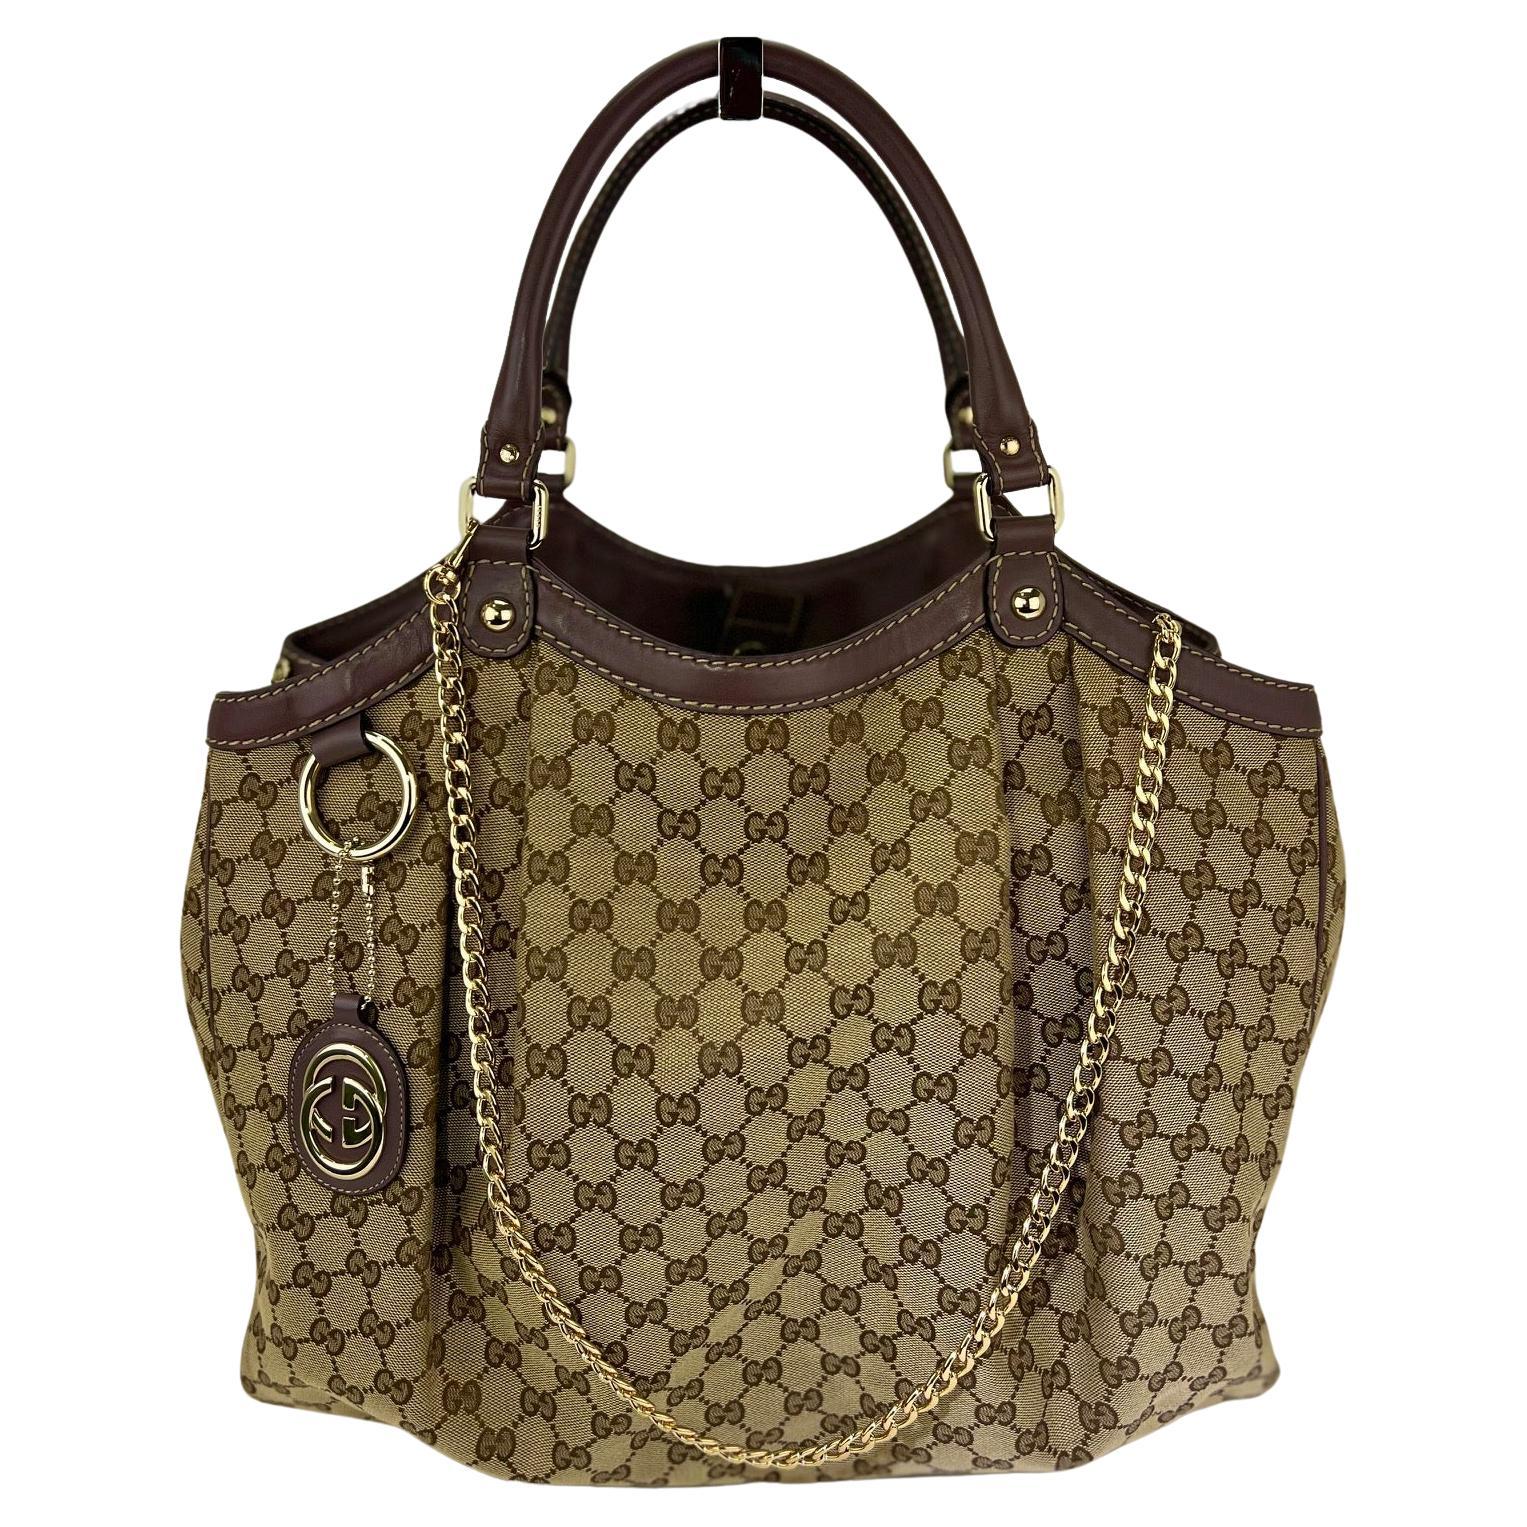 Gucci Sukey Large Monogram GG Canvas Hand Bag Tote 211943 added insert 